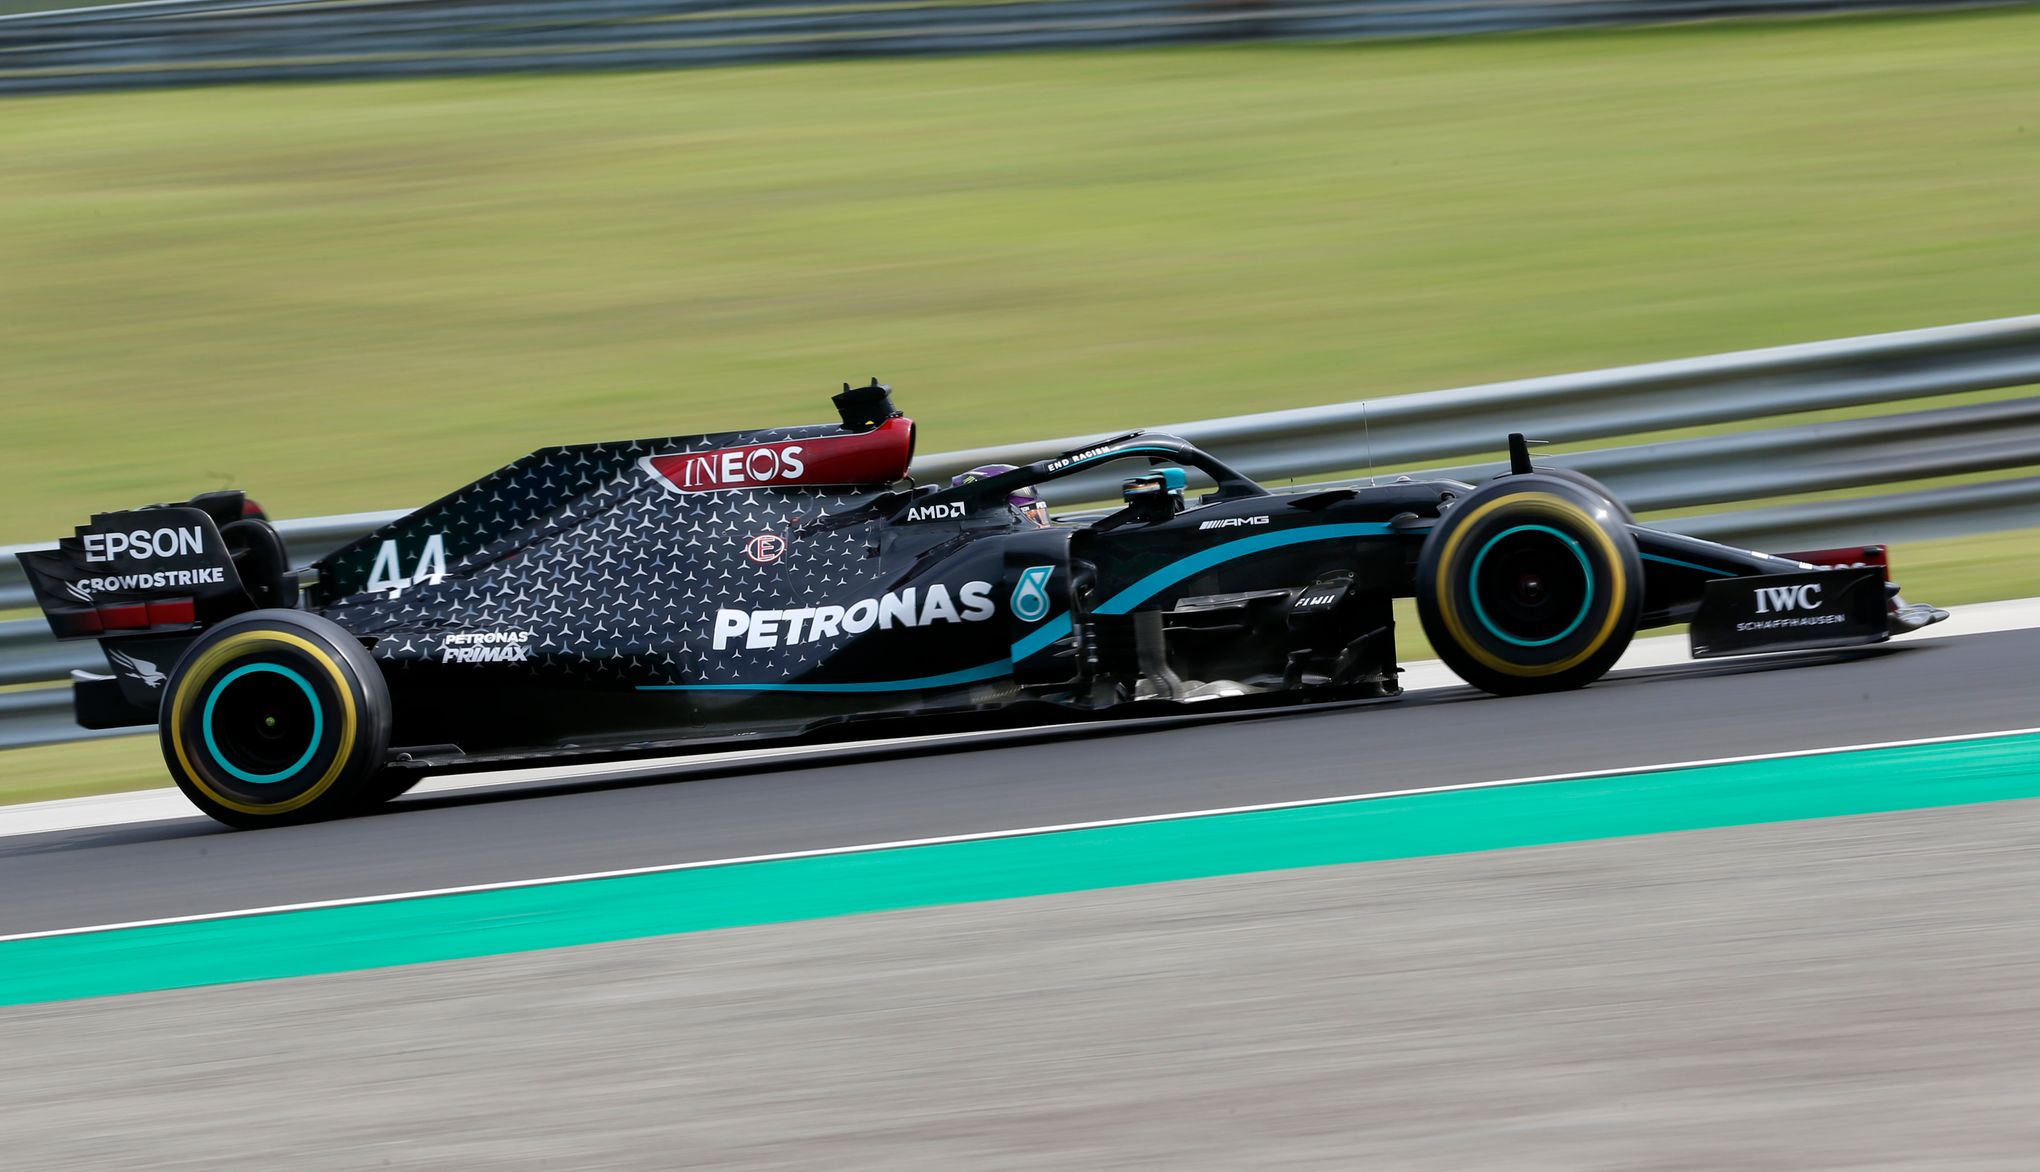 Formula One extends deal with Brazilian Grand Prix at Interlagos